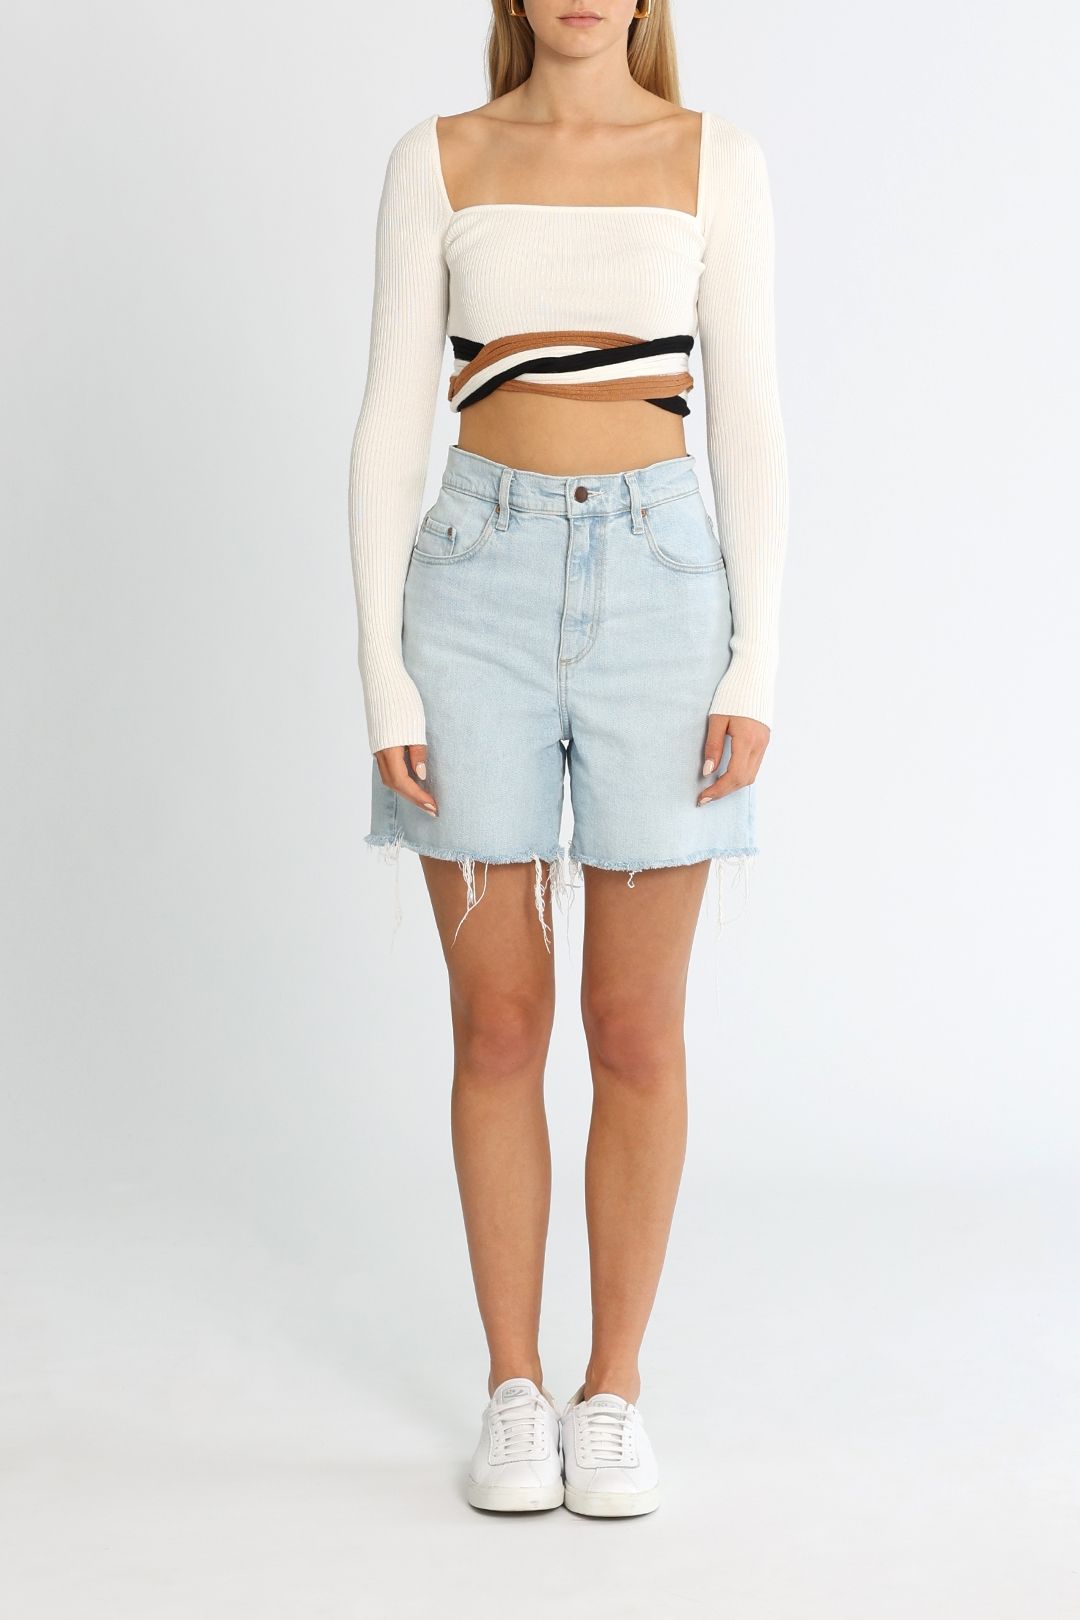 SOVERE Inertia Knit Crop All Sort Off White